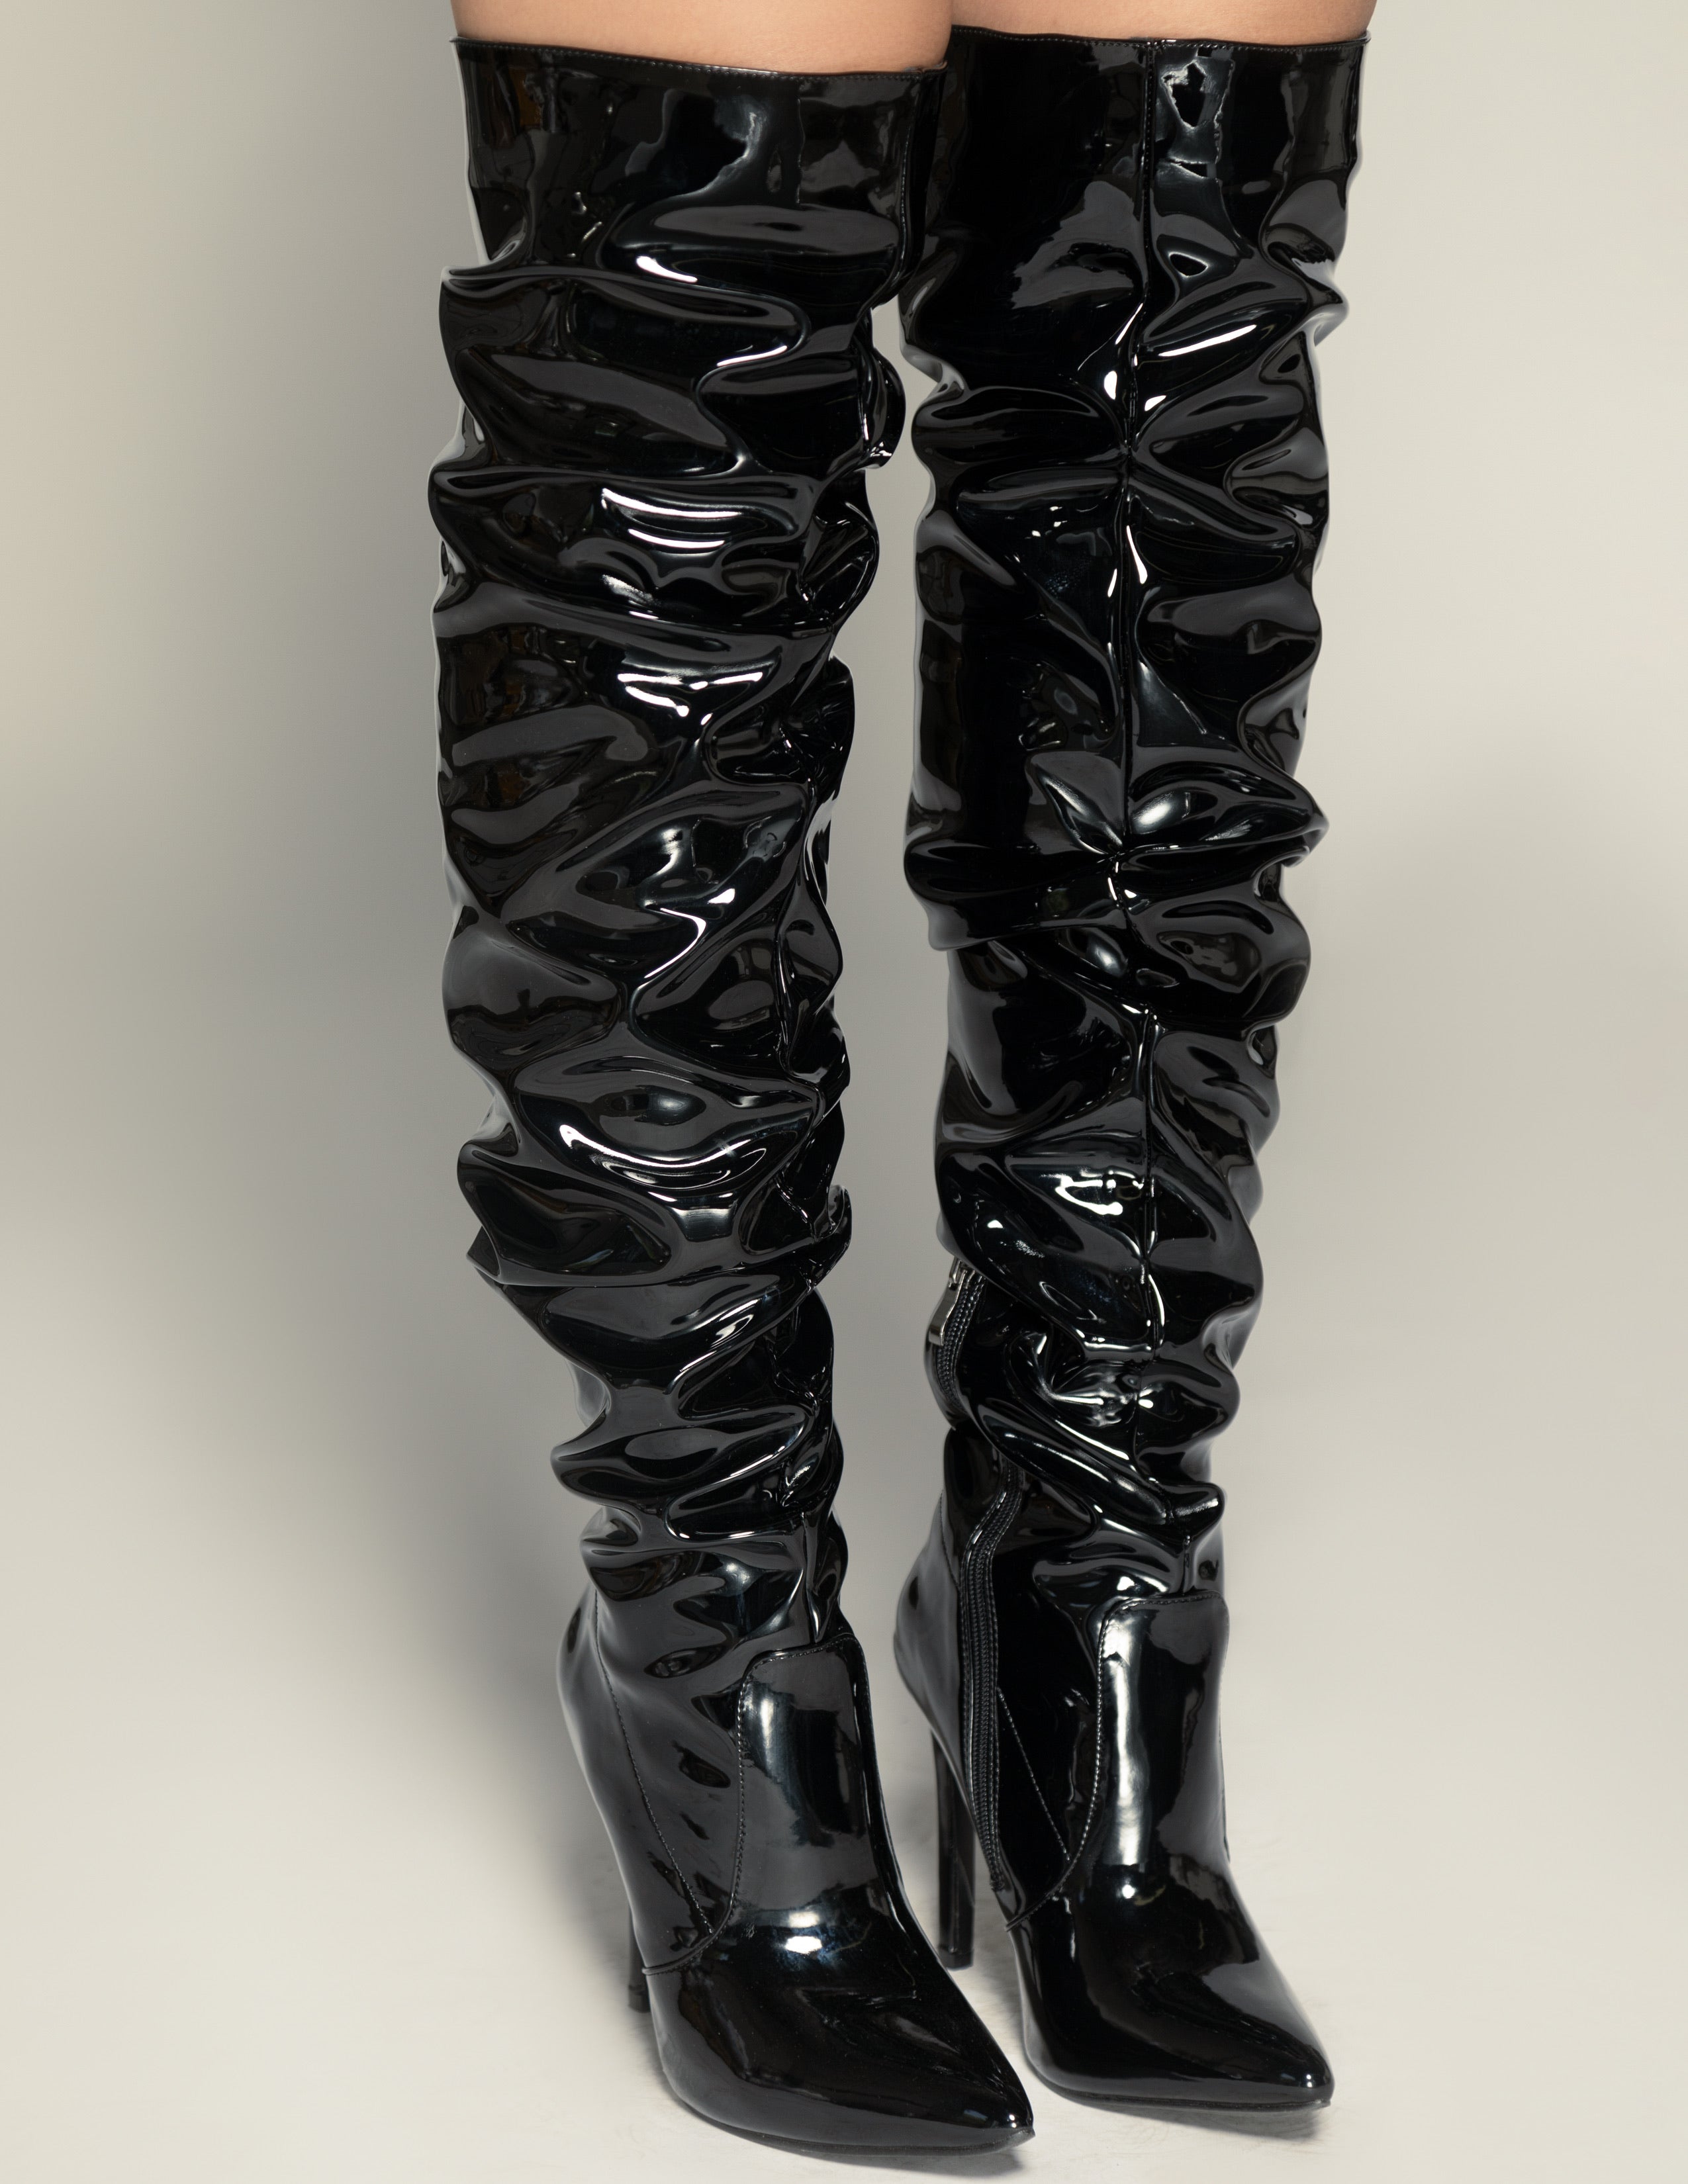 Patent Leather Thigh High Boots